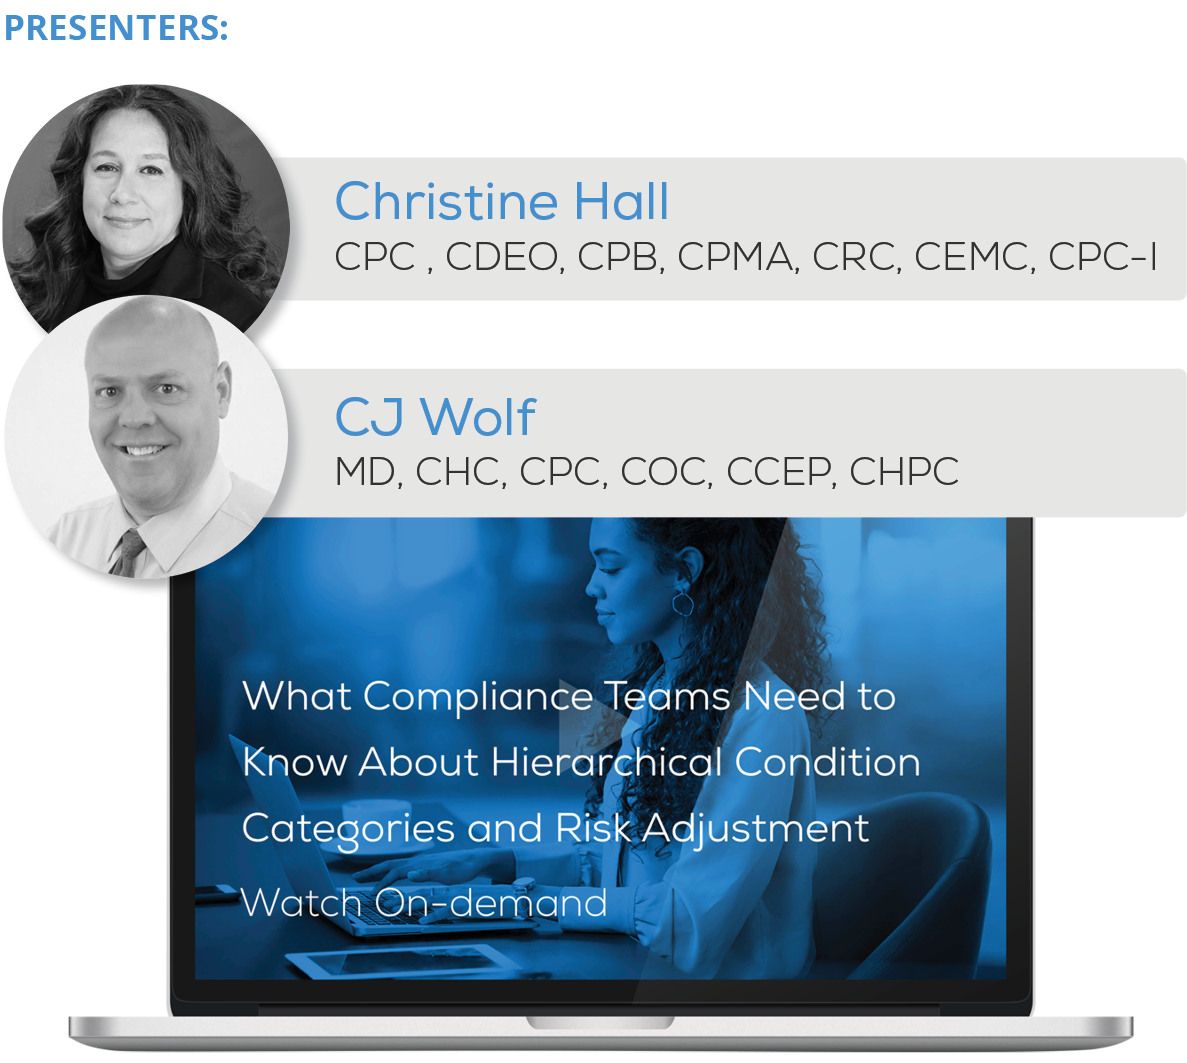 Watch the Webinar - What Compliance Teams Need to Know About Hierarchical Condition Categories and Risk Adjustment